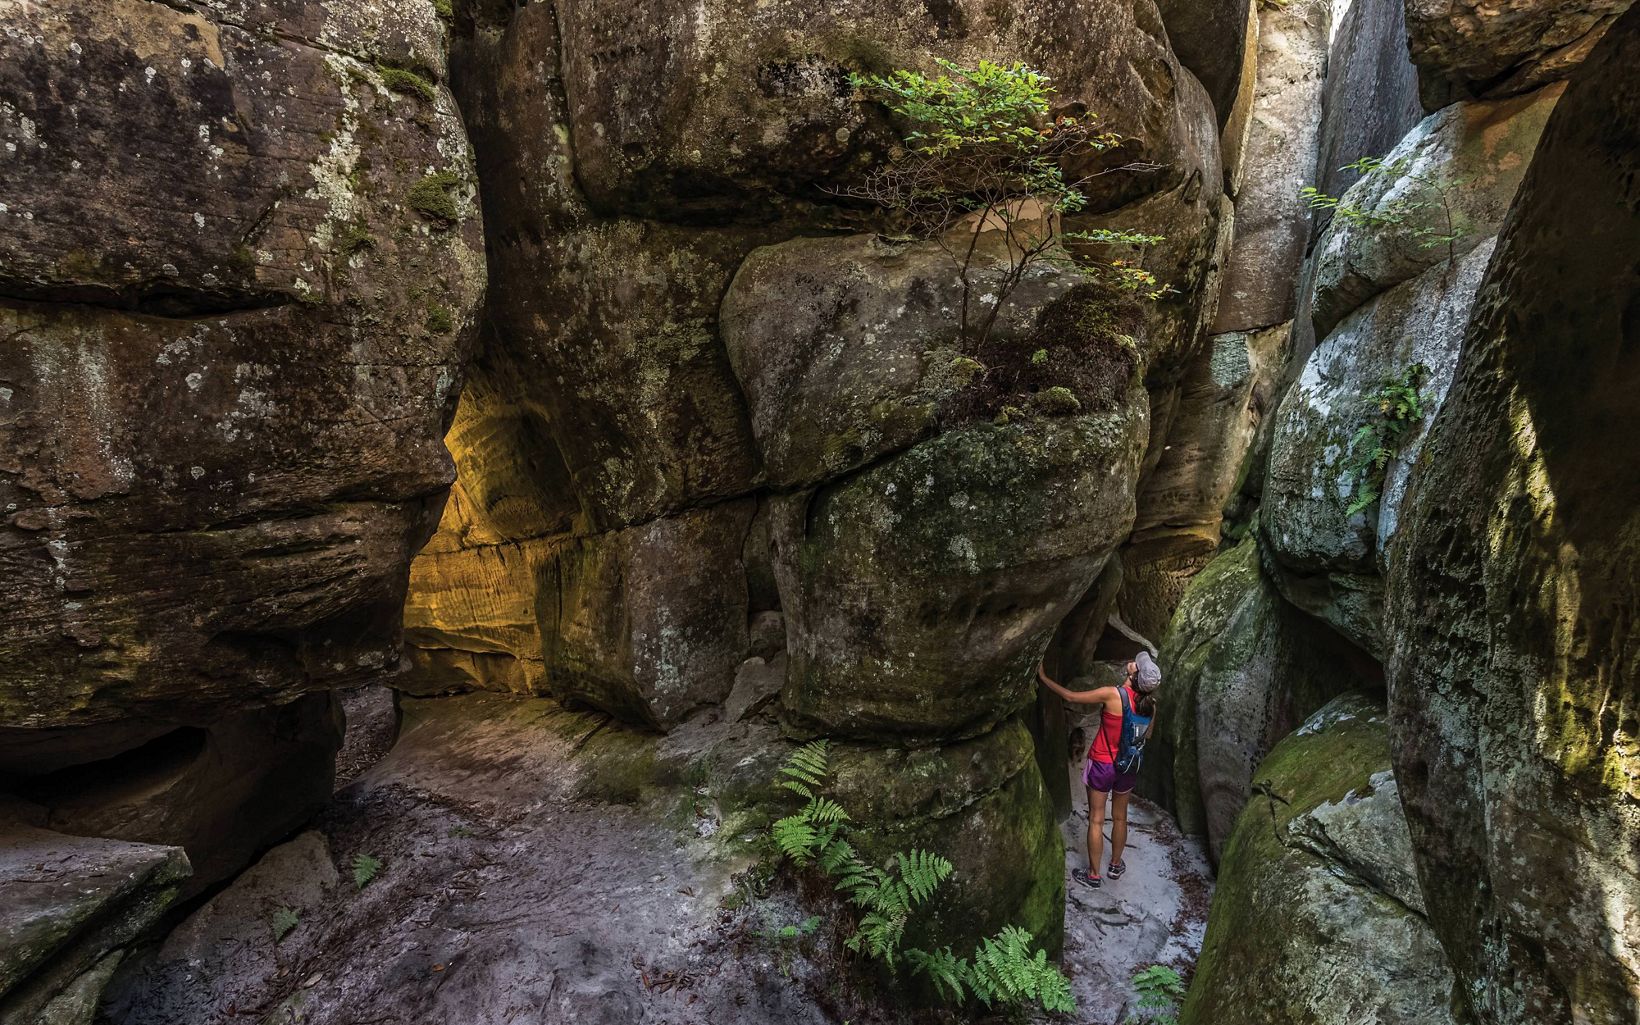 A woman in a pink shirt rests her hand on the face of a large rock formation. She looks up from the narrow slot created by the boulders.